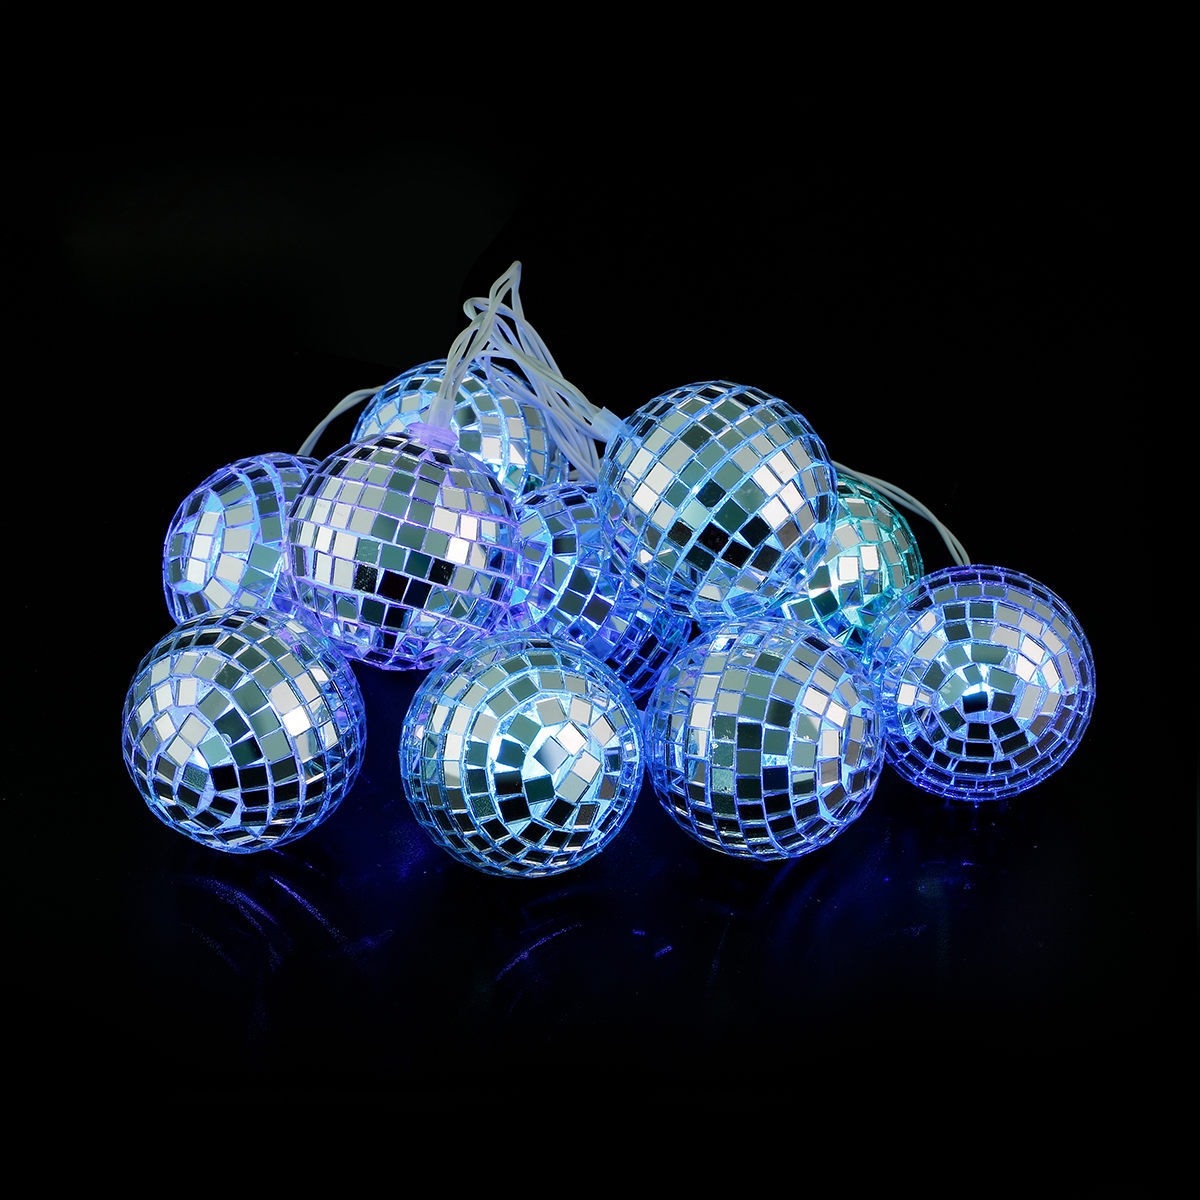 10 LED Colour Changing Mirror Ball String Lights